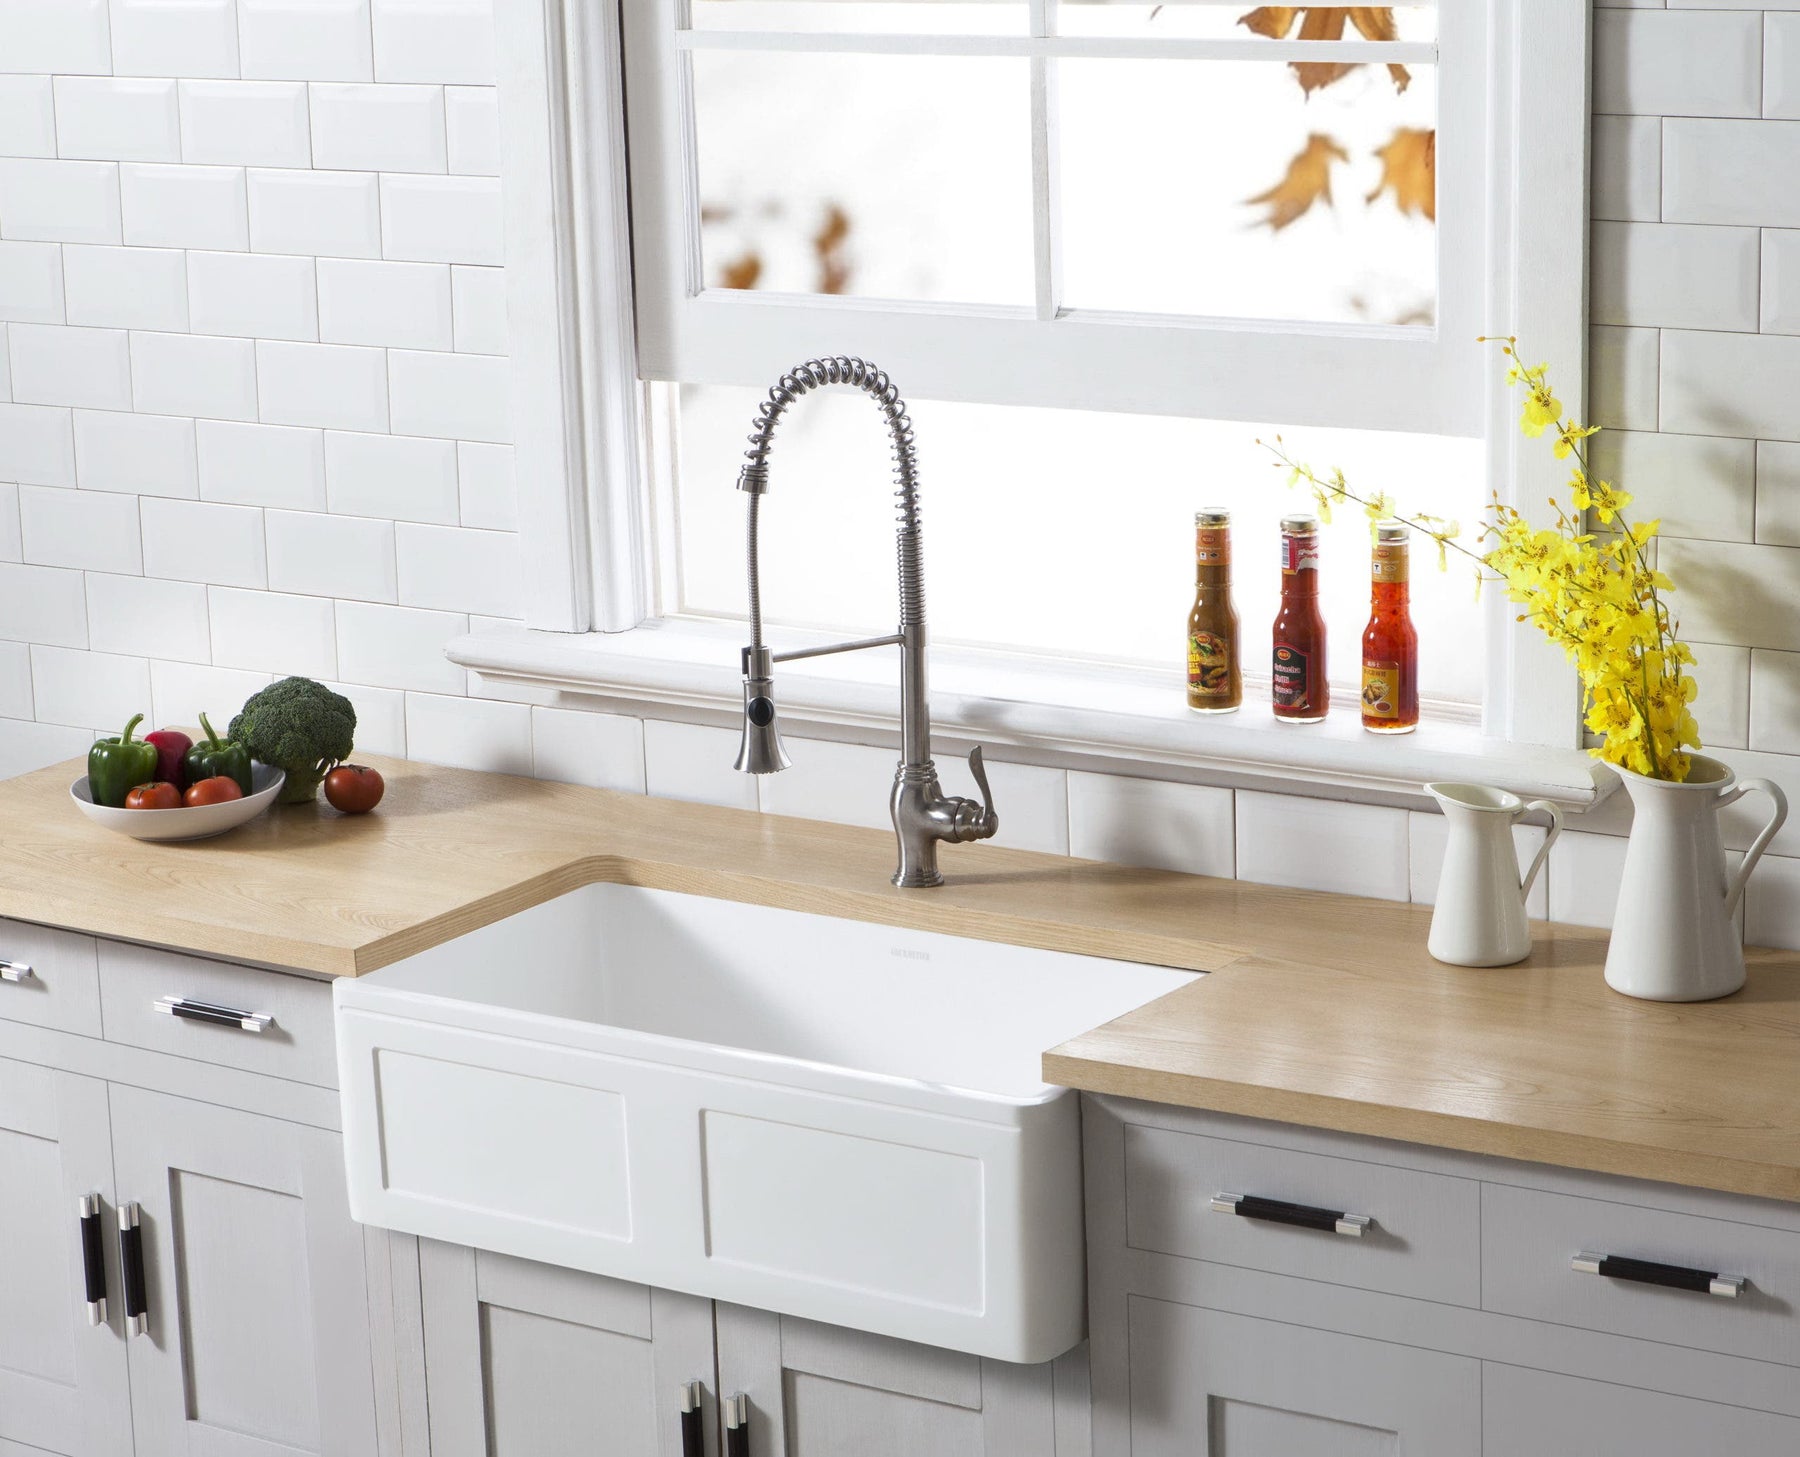 The Gourmetier White Stone Apron Front Farmhouse Kitchen Sink is the Contemporary Essential Your Home is Missing, GKFA331810DS